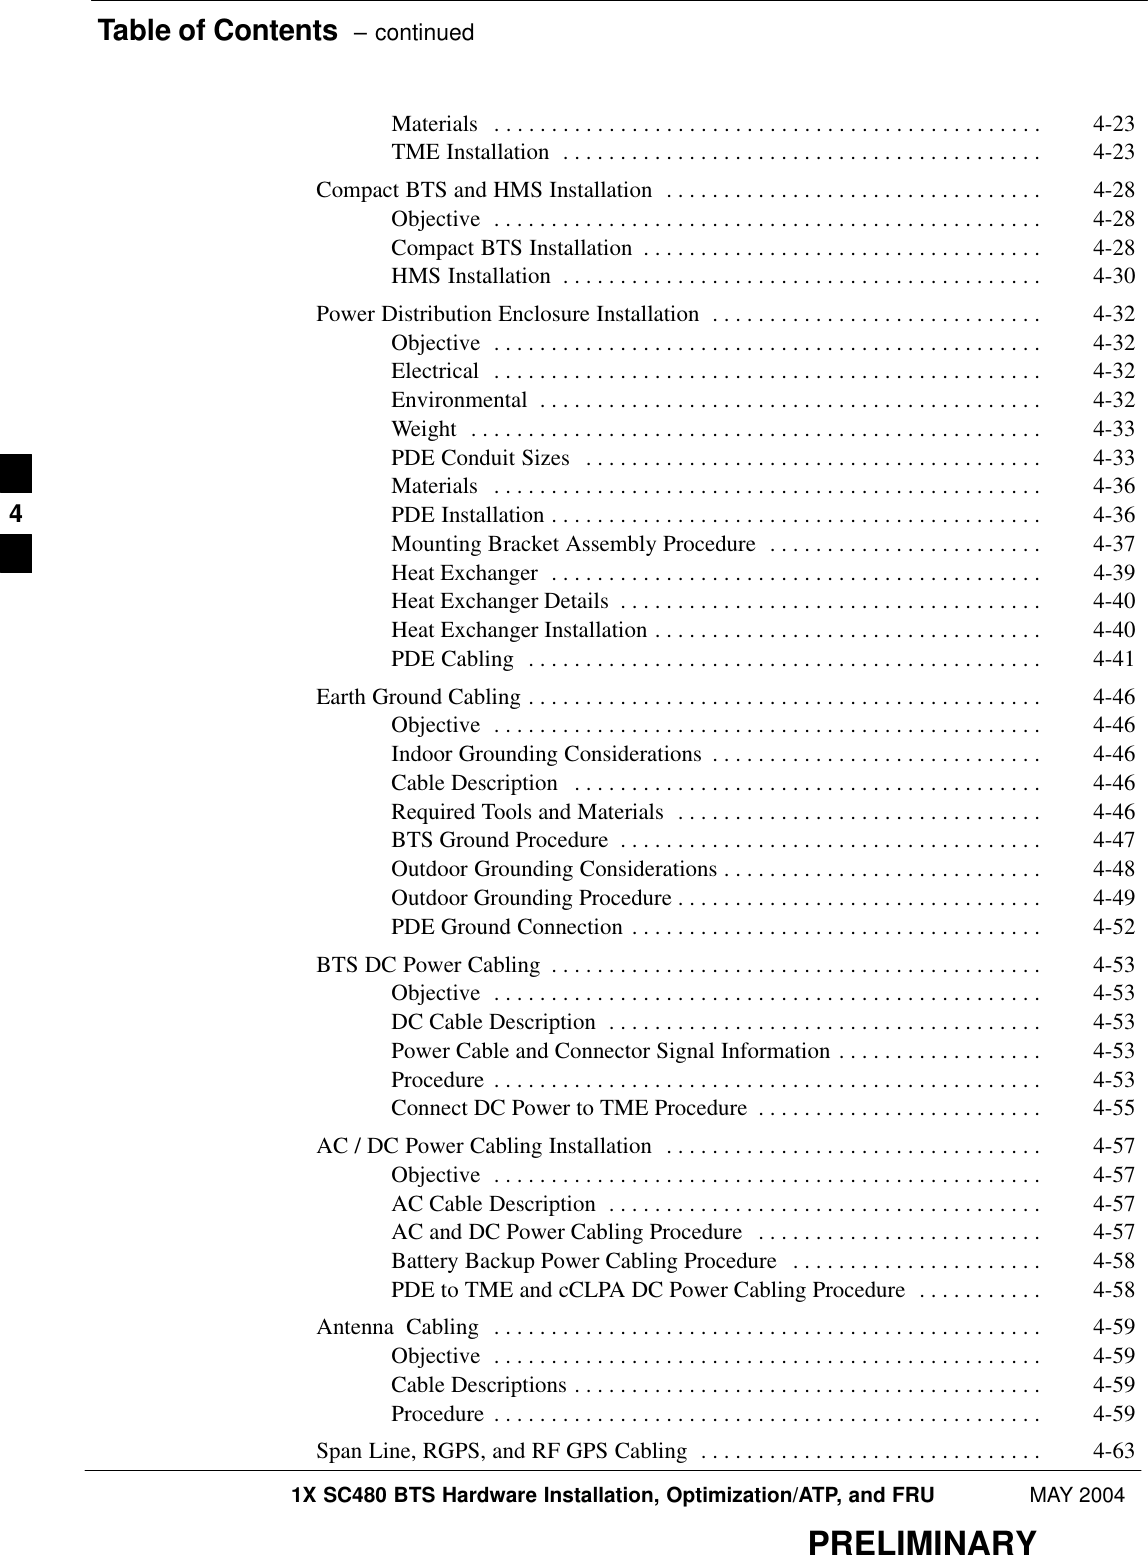 Table of Contents  – continued1X SC480 BTS Hardware Installation, Optimization/ATP, and FRU MAY 2004PRELIMINARYMaterials 4-23 . . . . . . . . . . . . . . . . . . . . . . . . . . . . . . . . . . . . . . . . . . . . . . . . TME Installation 4-23 . . . . . . . . . . . . . . . . . . . . . . . . . . . . . . . . . . . . . . . . . . Compact BTS and HMS Installation 4-28 . . . . . . . . . . . . . . . . . . . . . . . . . . . . . . . . . Objective 4-28 . . . . . . . . . . . . . . . . . . . . . . . . . . . . . . . . . . . . . . . . . . . . . . . . Compact BTS Installation 4-28 . . . . . . . . . . . . . . . . . . . . . . . . . . . . . . . . . . . HMS Installation 4-30 . . . . . . . . . . . . . . . . . . . . . . . . . . . . . . . . . . . . . . . . . . Power Distribution Enclosure Installation 4-32 . . . . . . . . . . . . . . . . . . . . . . . . . . . . . Objective 4-32 . . . . . . . . . . . . . . . . . . . . . . . . . . . . . . . . . . . . . . . . . . . . . . . . Electrical 4-32 . . . . . . . . . . . . . . . . . . . . . . . . . . . . . . . . . . . . . . . . . . . . . . . . Environmental 4-32 . . . . . . . . . . . . . . . . . . . . . . . . . . . . . . . . . . . . . . . . . . . . Weight 4-33 . . . . . . . . . . . . . . . . . . . . . . . . . . . . . . . . . . . . . . . . . . . . . . . . . . PDE Conduit Sizes 4-33 . . . . . . . . . . . . . . . . . . . . . . . . . . . . . . . . . . . . . . . . Materials 4-36 . . . . . . . . . . . . . . . . . . . . . . . . . . . . . . . . . . . . . . . . . . . . . . . . PDE Installation 4-36 . . . . . . . . . . . . . . . . . . . . . . . . . . . . . . . . . . . . . . . . . . . Mounting Bracket Assembly Procedure 4-37 . . . . . . . . . . . . . . . . . . . . . . . . Heat Exchanger 4-39 . . . . . . . . . . . . . . . . . . . . . . . . . . . . . . . . . . . . . . . . . . . Heat Exchanger Details 4-40 . . . . . . . . . . . . . . . . . . . . . . . . . . . . . . . . . . . . . Heat Exchanger Installation 4-40 . . . . . . . . . . . . . . . . . . . . . . . . . . . . . . . . . . PDE Cabling 4-41 . . . . . . . . . . . . . . . . . . . . . . . . . . . . . . . . . . . . . . . . . . . . . Earth Ground Cabling 4-46 . . . . . . . . . . . . . . . . . . . . . . . . . . . . . . . . . . . . . . . . . . . . . Objective 4-46 . . . . . . . . . . . . . . . . . . . . . . . . . . . . . . . . . . . . . . . . . . . . . . . . Indoor Grounding Considerations 4-46 . . . . . . . . . . . . . . . . . . . . . . . . . . . . . Cable Description 4-46 . . . . . . . . . . . . . . . . . . . . . . . . . . . . . . . . . . . . . . . . . Required Tools and Materials 4-46 . . . . . . . . . . . . . . . . . . . . . . . . . . . . . . . . BTS Ground Procedure 4-47 . . . . . . . . . . . . . . . . . . . . . . . . . . . . . . . . . . . . . Outdoor Grounding Considerations 4-48 . . . . . . . . . . . . . . . . . . . . . . . . . . . . Outdoor Grounding Procedure 4-49 . . . . . . . . . . . . . . . . . . . . . . . . . . . . . . . . PDE Ground Connection 4-52 . . . . . . . . . . . . . . . . . . . . . . . . . . . . . . . . . . . . BTS DC Power Cabling 4-53 . . . . . . . . . . . . . . . . . . . . . . . . . . . . . . . . . . . . . . . . . . . Objective 4-53 . . . . . . . . . . . . . . . . . . . . . . . . . . . . . . . . . . . . . . . . . . . . . . . . DC Cable Description 4-53 . . . . . . . . . . . . . . . . . . . . . . . . . . . . . . . . . . . . . . Power Cable and Connector Signal Information 4-53 . . . . . . . . . . . . . . . . . . Procedure 4-53 . . . . . . . . . . . . . . . . . . . . . . . . . . . . . . . . . . . . . . . . . . . . . . . . Connect DC Power to TME Procedure 4-55 . . . . . . . . . . . . . . . . . . . . . . . . . AC / DC Power Cabling Installation 4-57 . . . . . . . . . . . . . . . . . . . . . . . . . . . . . . . . . Objective 4-57 . . . . . . . . . . . . . . . . . . . . . . . . . . . . . . . . . . . . . . . . . . . . . . . . AC Cable Description 4-57 . . . . . . . . . . . . . . . . . . . . . . . . . . . . . . . . . . . . . . AC and DC Power Cabling Procedure 4-57 . . . . . . . . . . . . . . . . . . . . . . . . . Battery Backup Power Cabling Procedure 4-58 . . . . . . . . . . . . . . . . . . . . . . PDE to TME and cCLPA DC Power Cabling Procedure 4-58 . . . . . . . . . . . Antenna  Cabling 4-59 . . . . . . . . . . . . . . . . . . . . . . . . . . . . . . . . . . . . . . . . . . . . . . . . Objective 4-59 . . . . . . . . . . . . . . . . . . . . . . . . . . . . . . . . . . . . . . . . . . . . . . . . Cable Descriptions 4-59 . . . . . . . . . . . . . . . . . . . . . . . . . . . . . . . . . . . . . . . . . Procedure 4-59 . . . . . . . . . . . . . . . . . . . . . . . . . . . . . . . . . . . . . . . . . . . . . . . . Span Line, RGPS, and RF GPS Cabling 4-63 . . . . . . . . . . . . . . . . . . . . . . . . . . . . . . 4